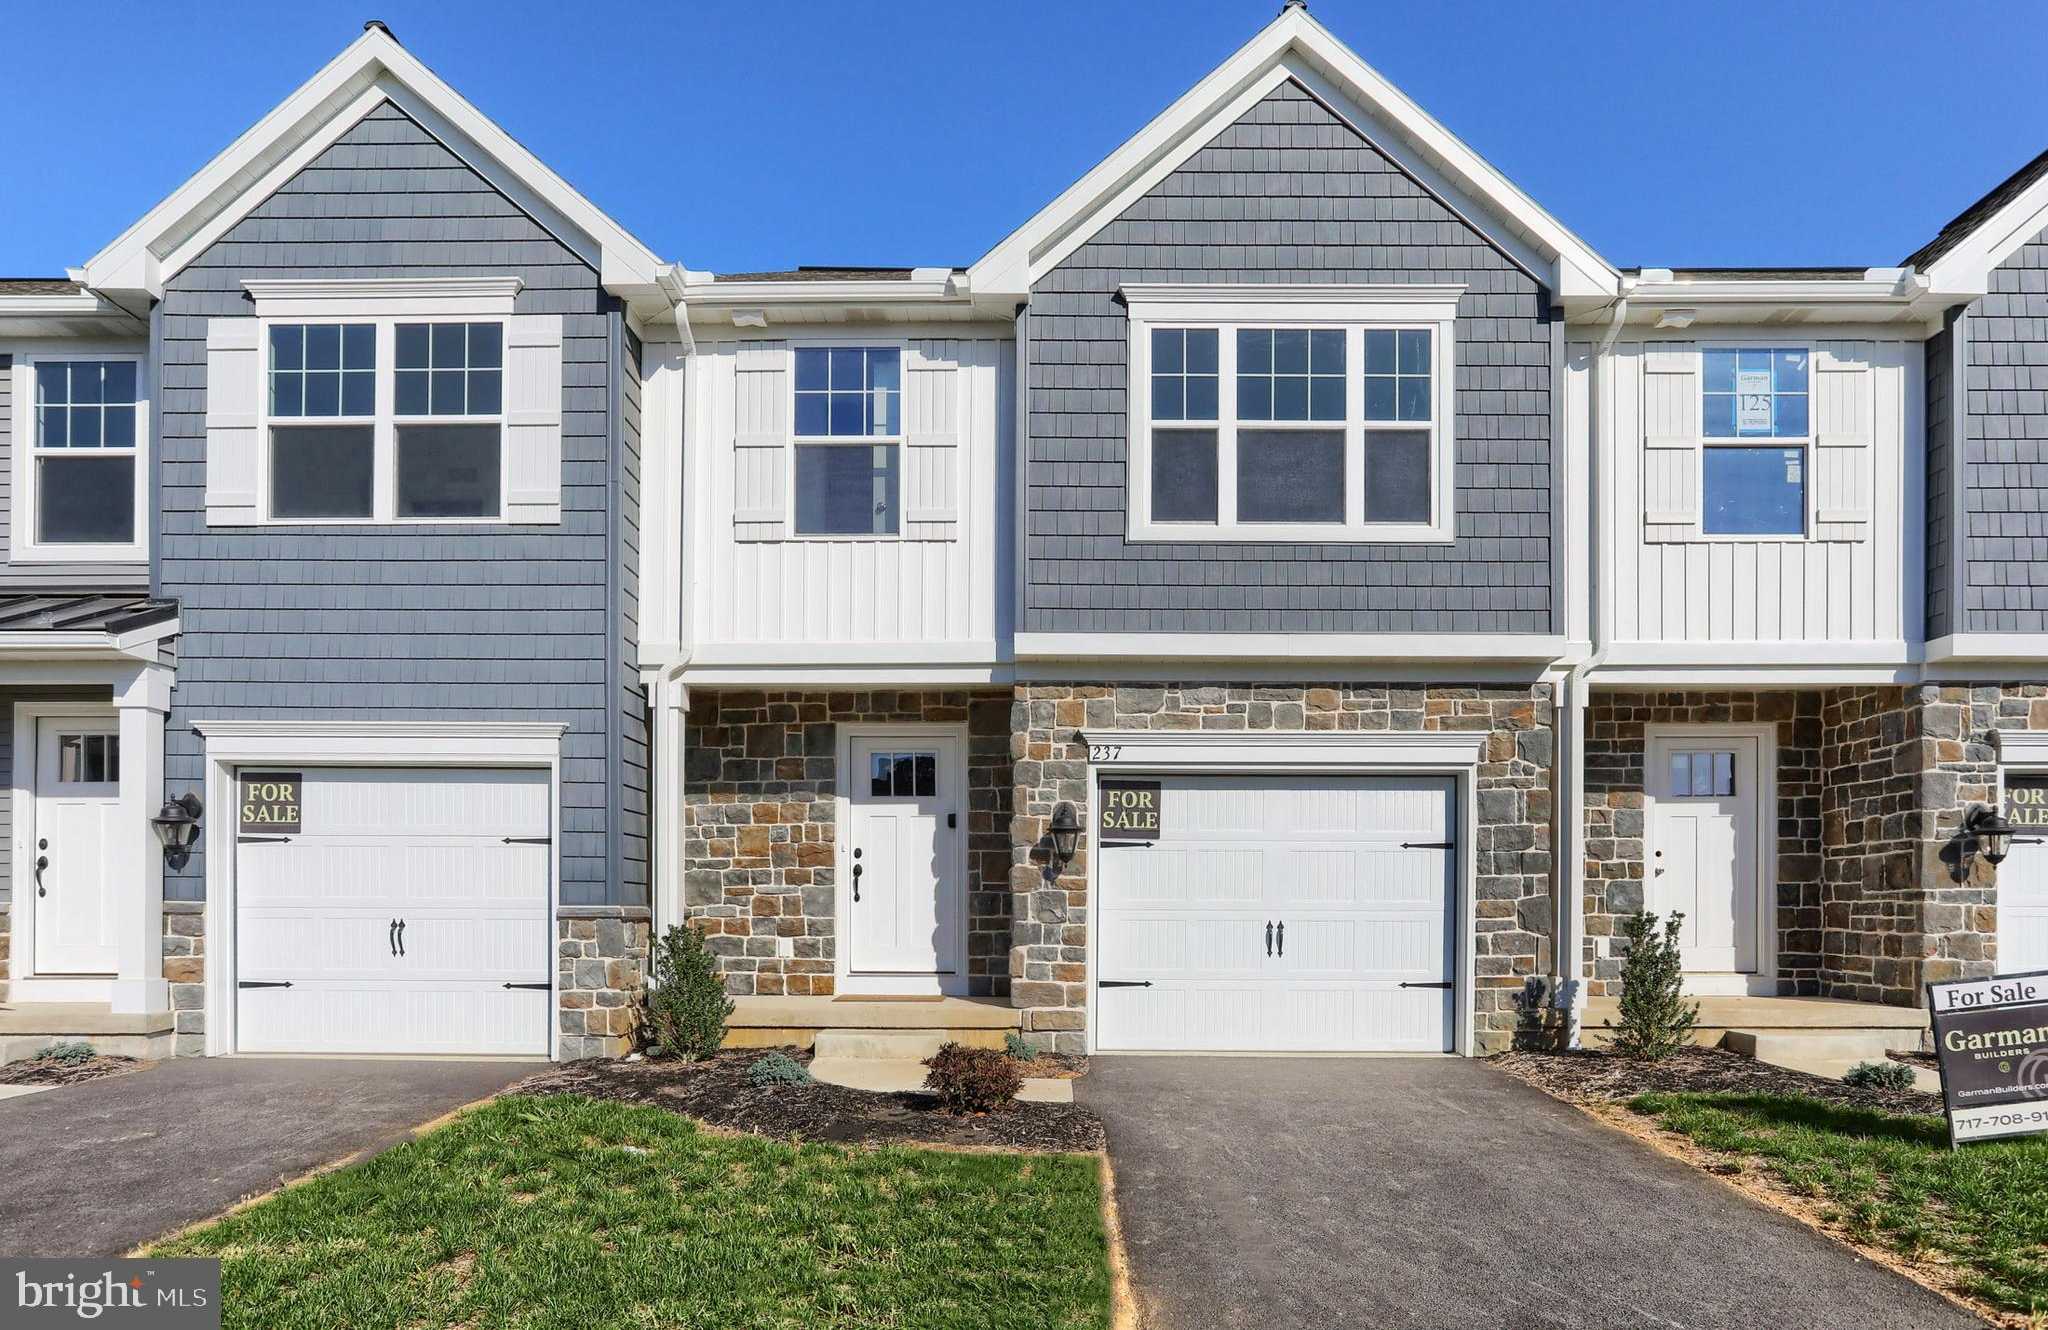 View ANNVILLE, PA 17003 townhome